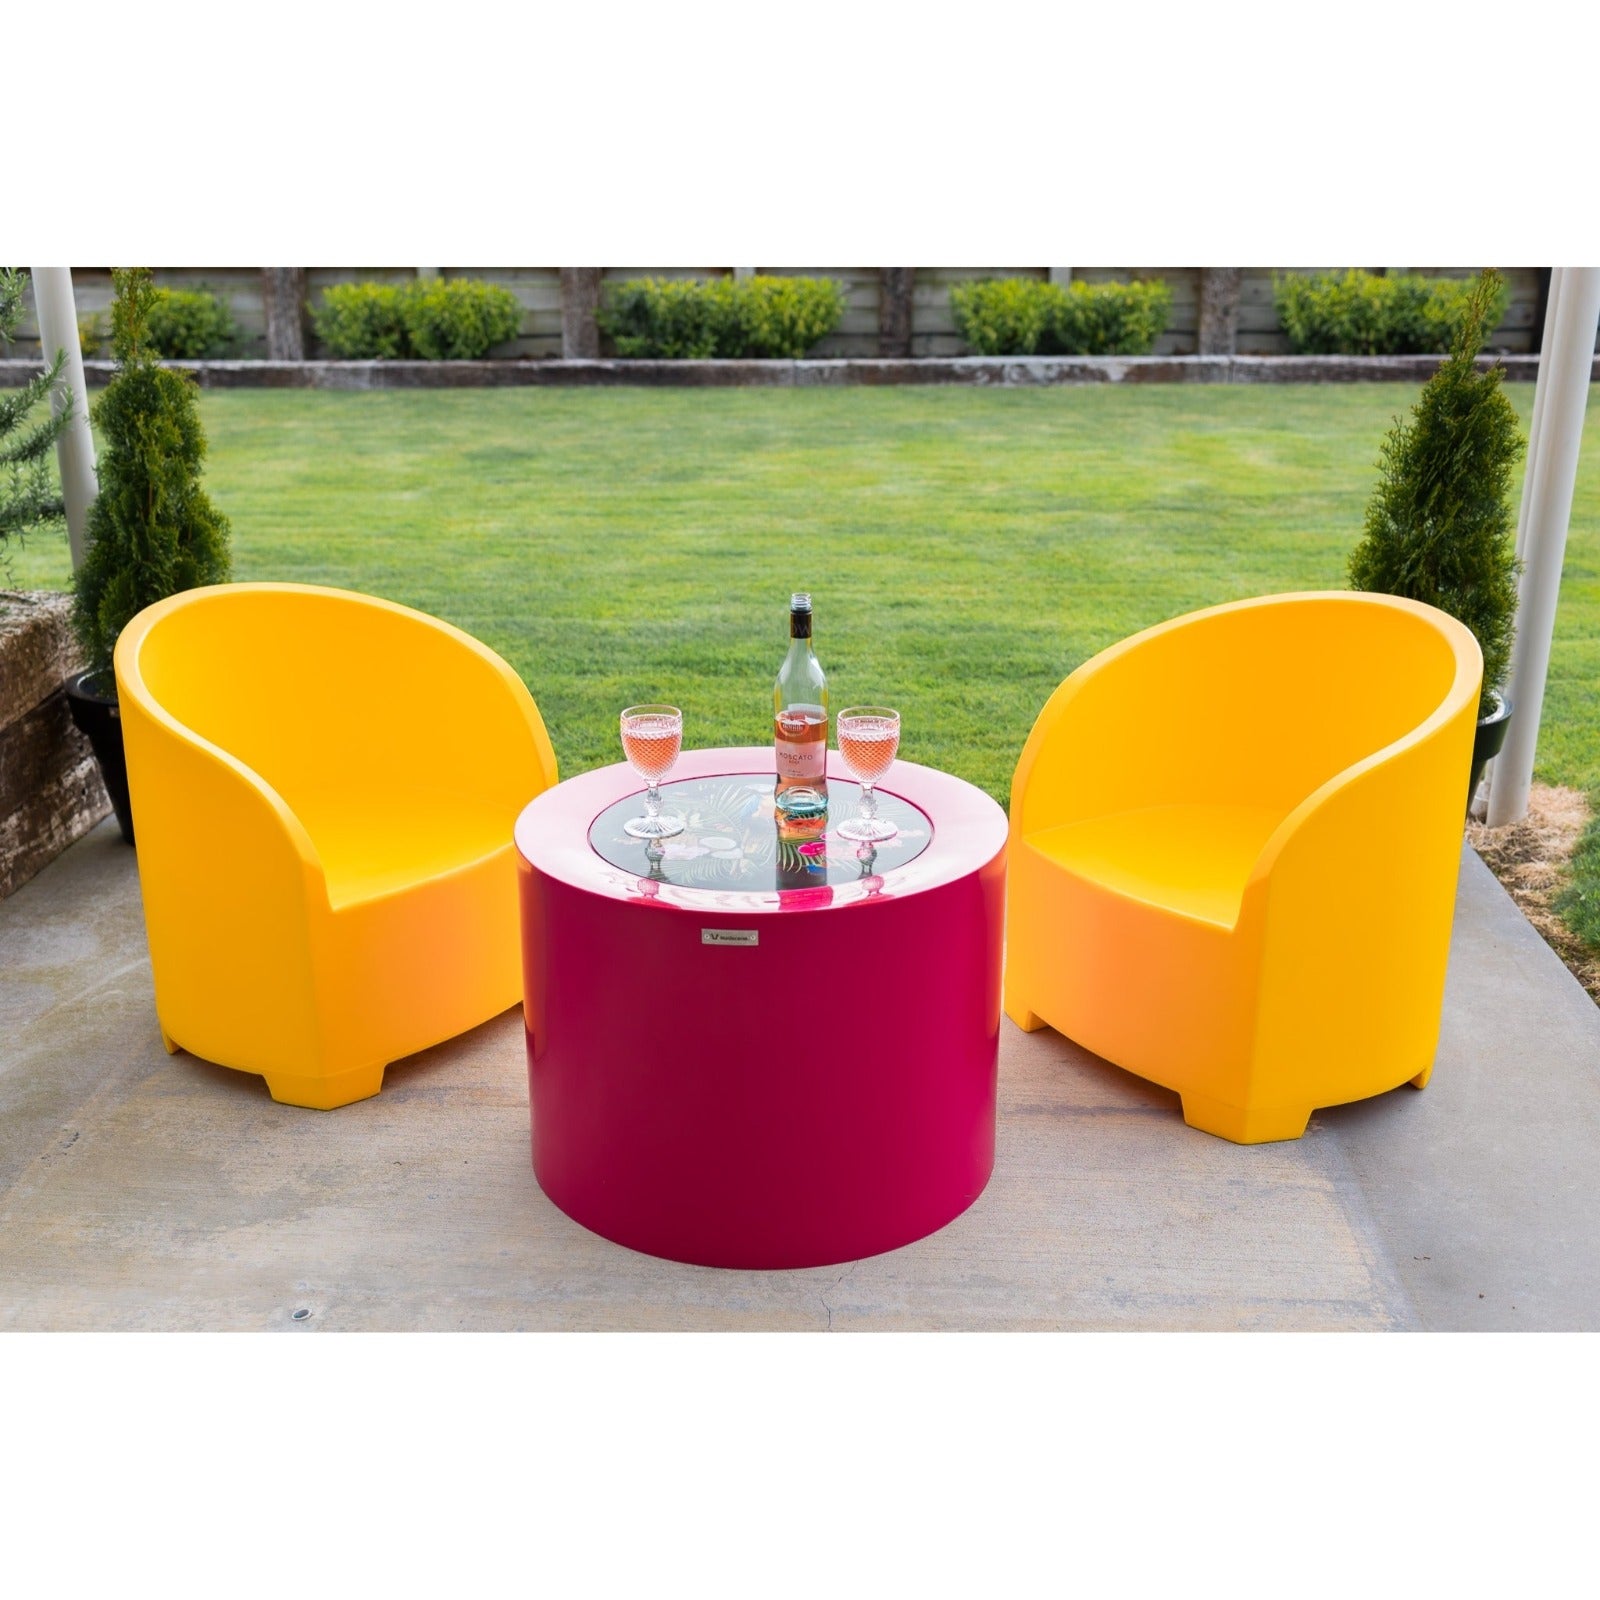 Bright yellow and pink Modscene outdoor furniture on a patio. Outdoor furniture New Zealand.